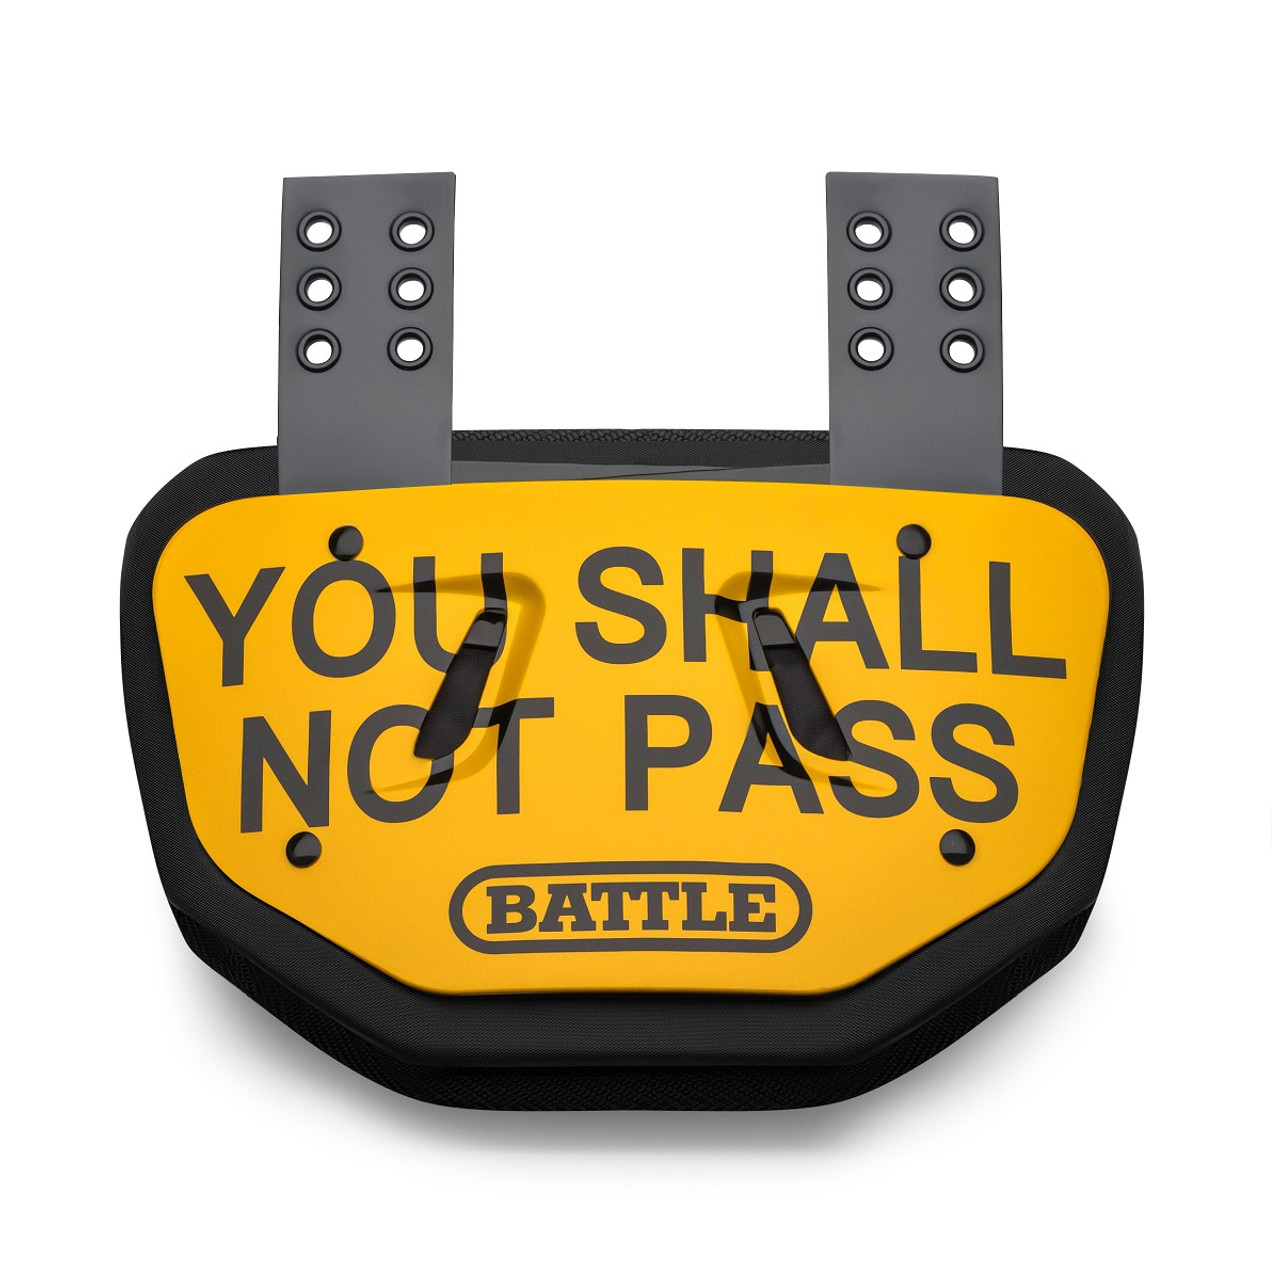 Shall Not Pass Chrome Football Back Plate - Adult